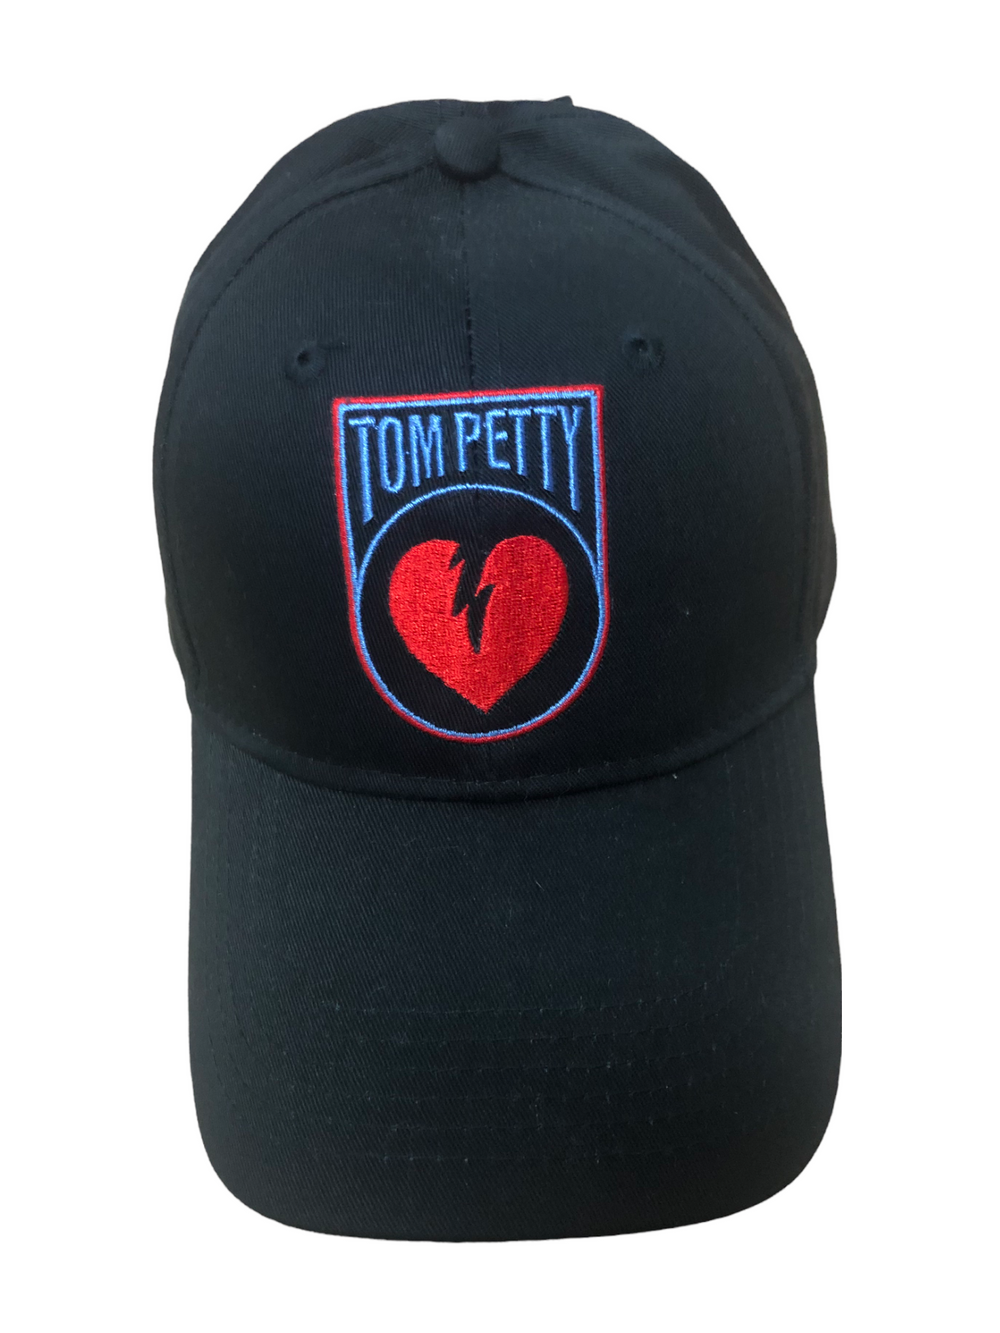 Tom Petty & The Heartbreakers Official Embroidered Peak Cap Adjustable